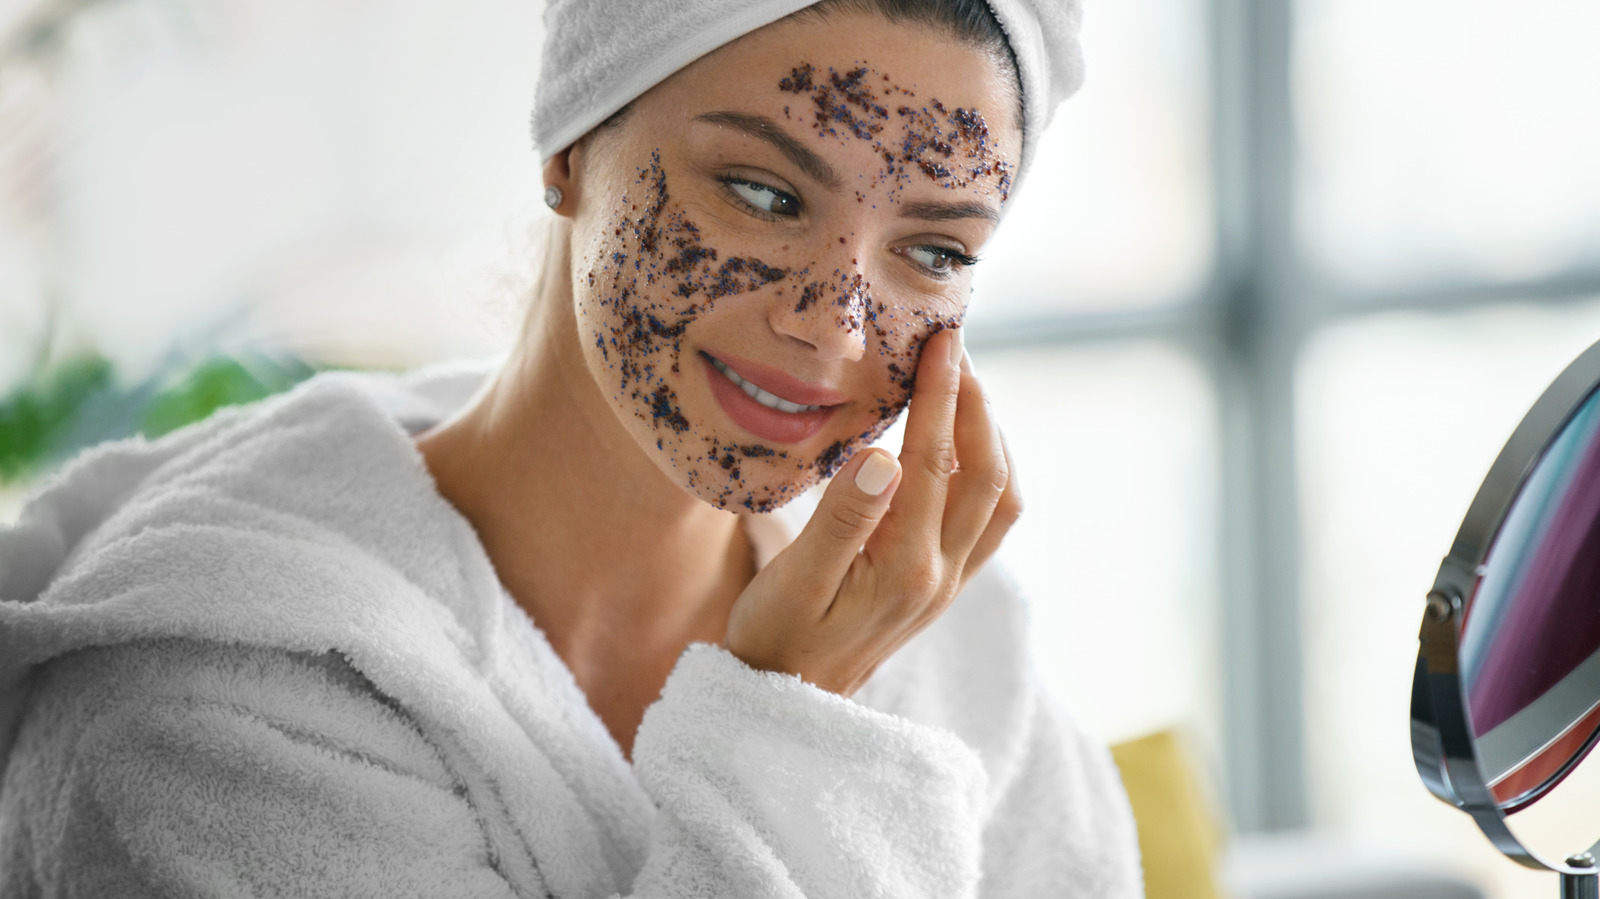 Do Physical Exfoliants Really Deserve The Bad Rep? Our Derm Weighs In pic